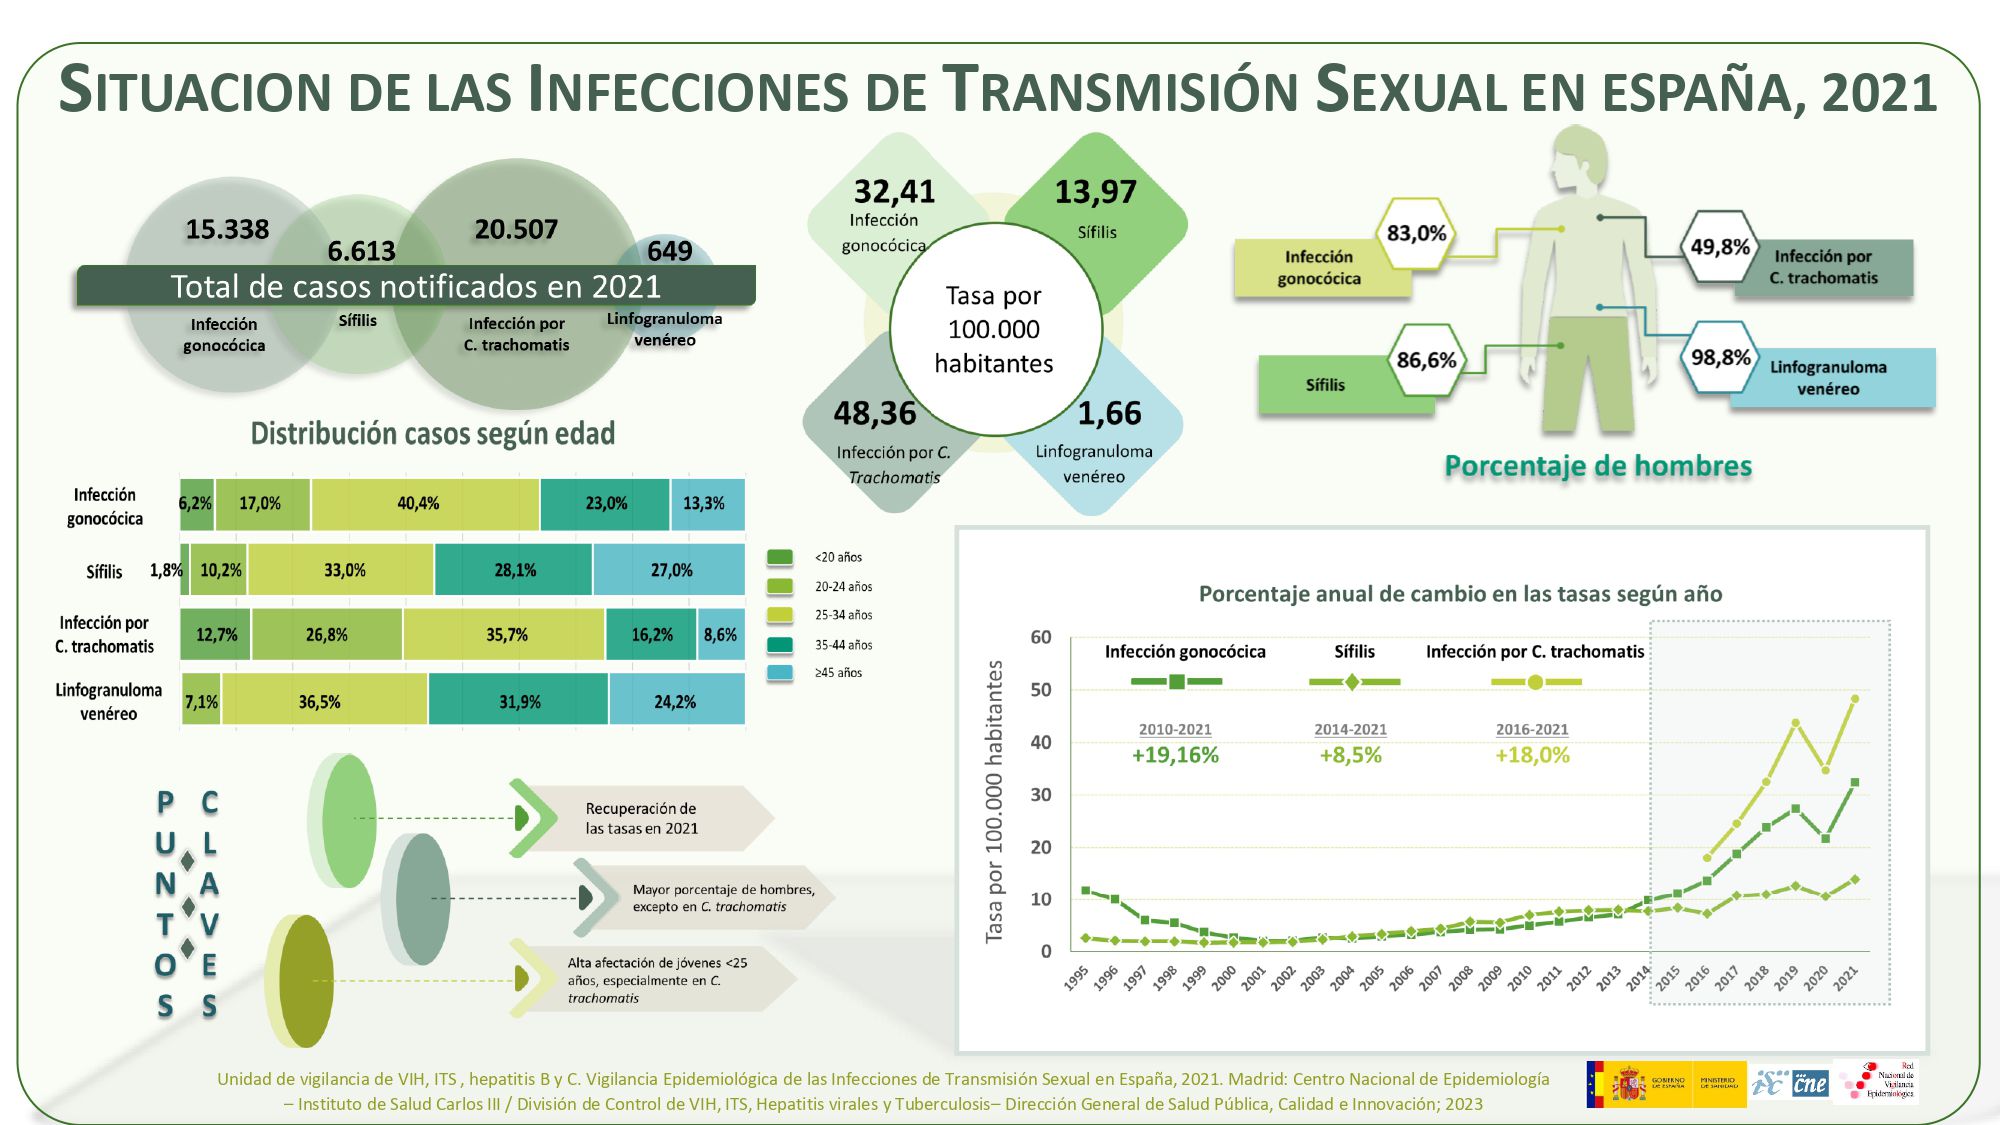 Infographic with the situation of sexually transmitted infections in Spain in 2021 (ISCIII)